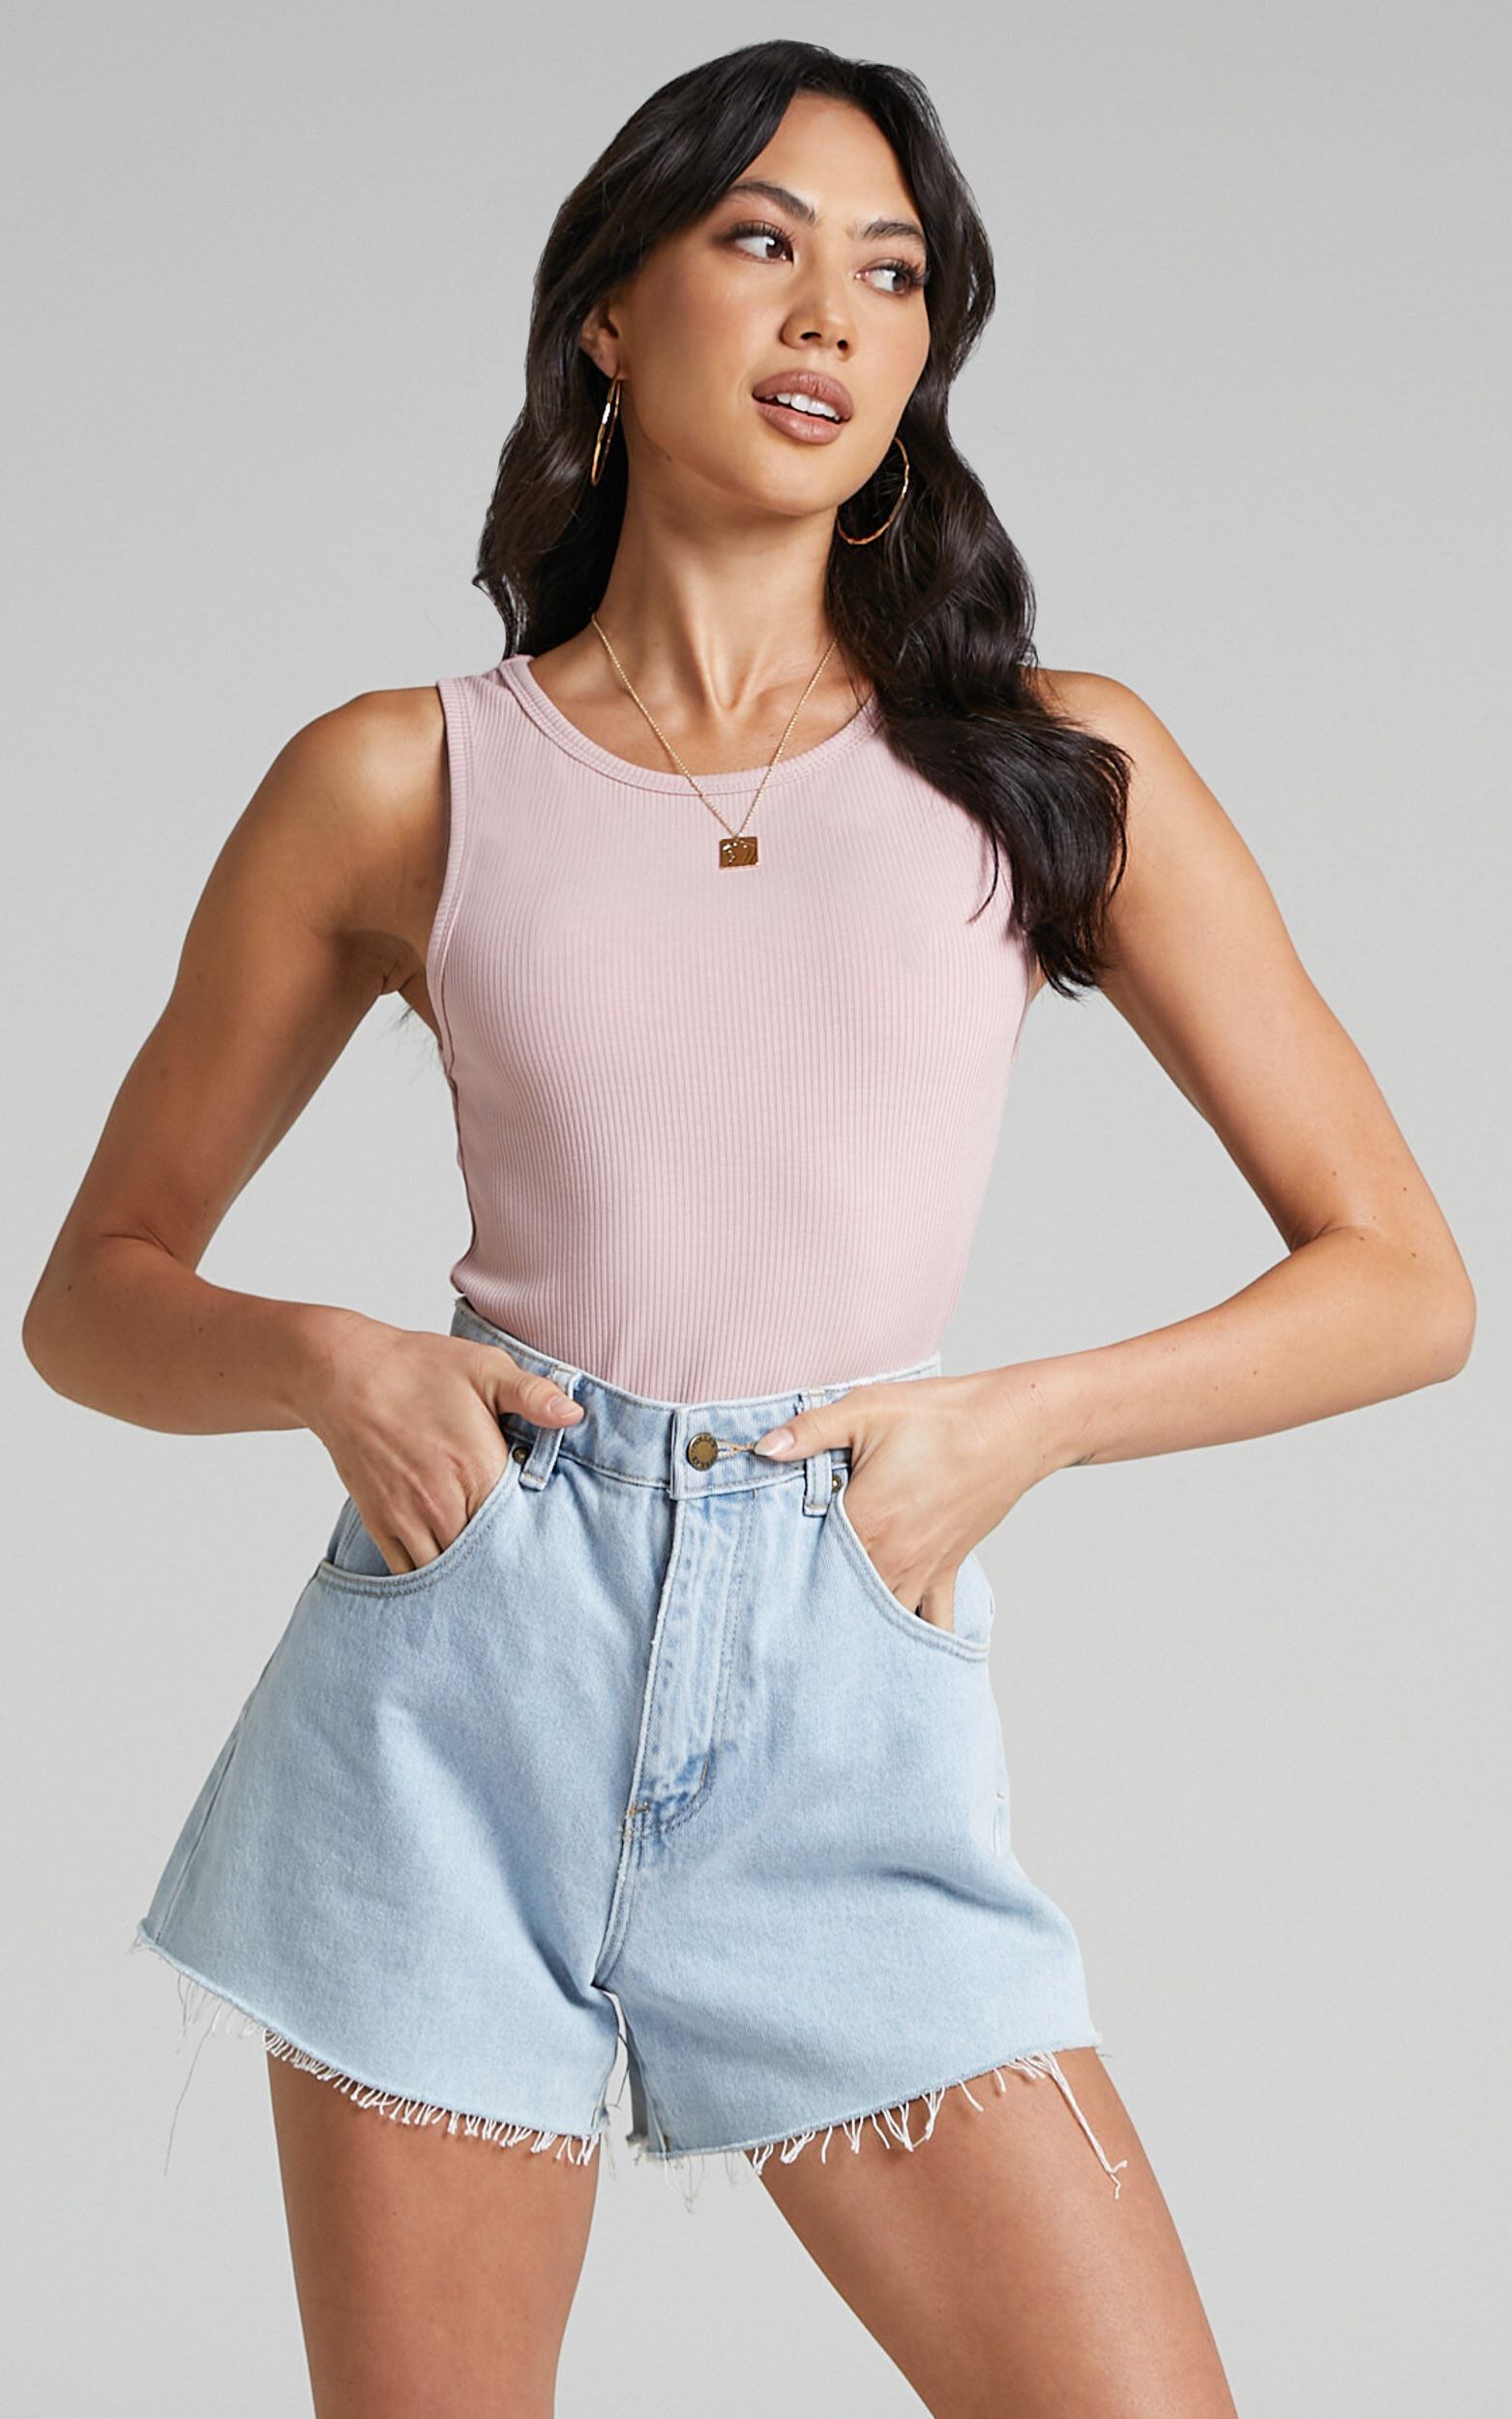 Can't You Tell Top - Ribbed Tank Top in Dusty Pink - 04, PNK1